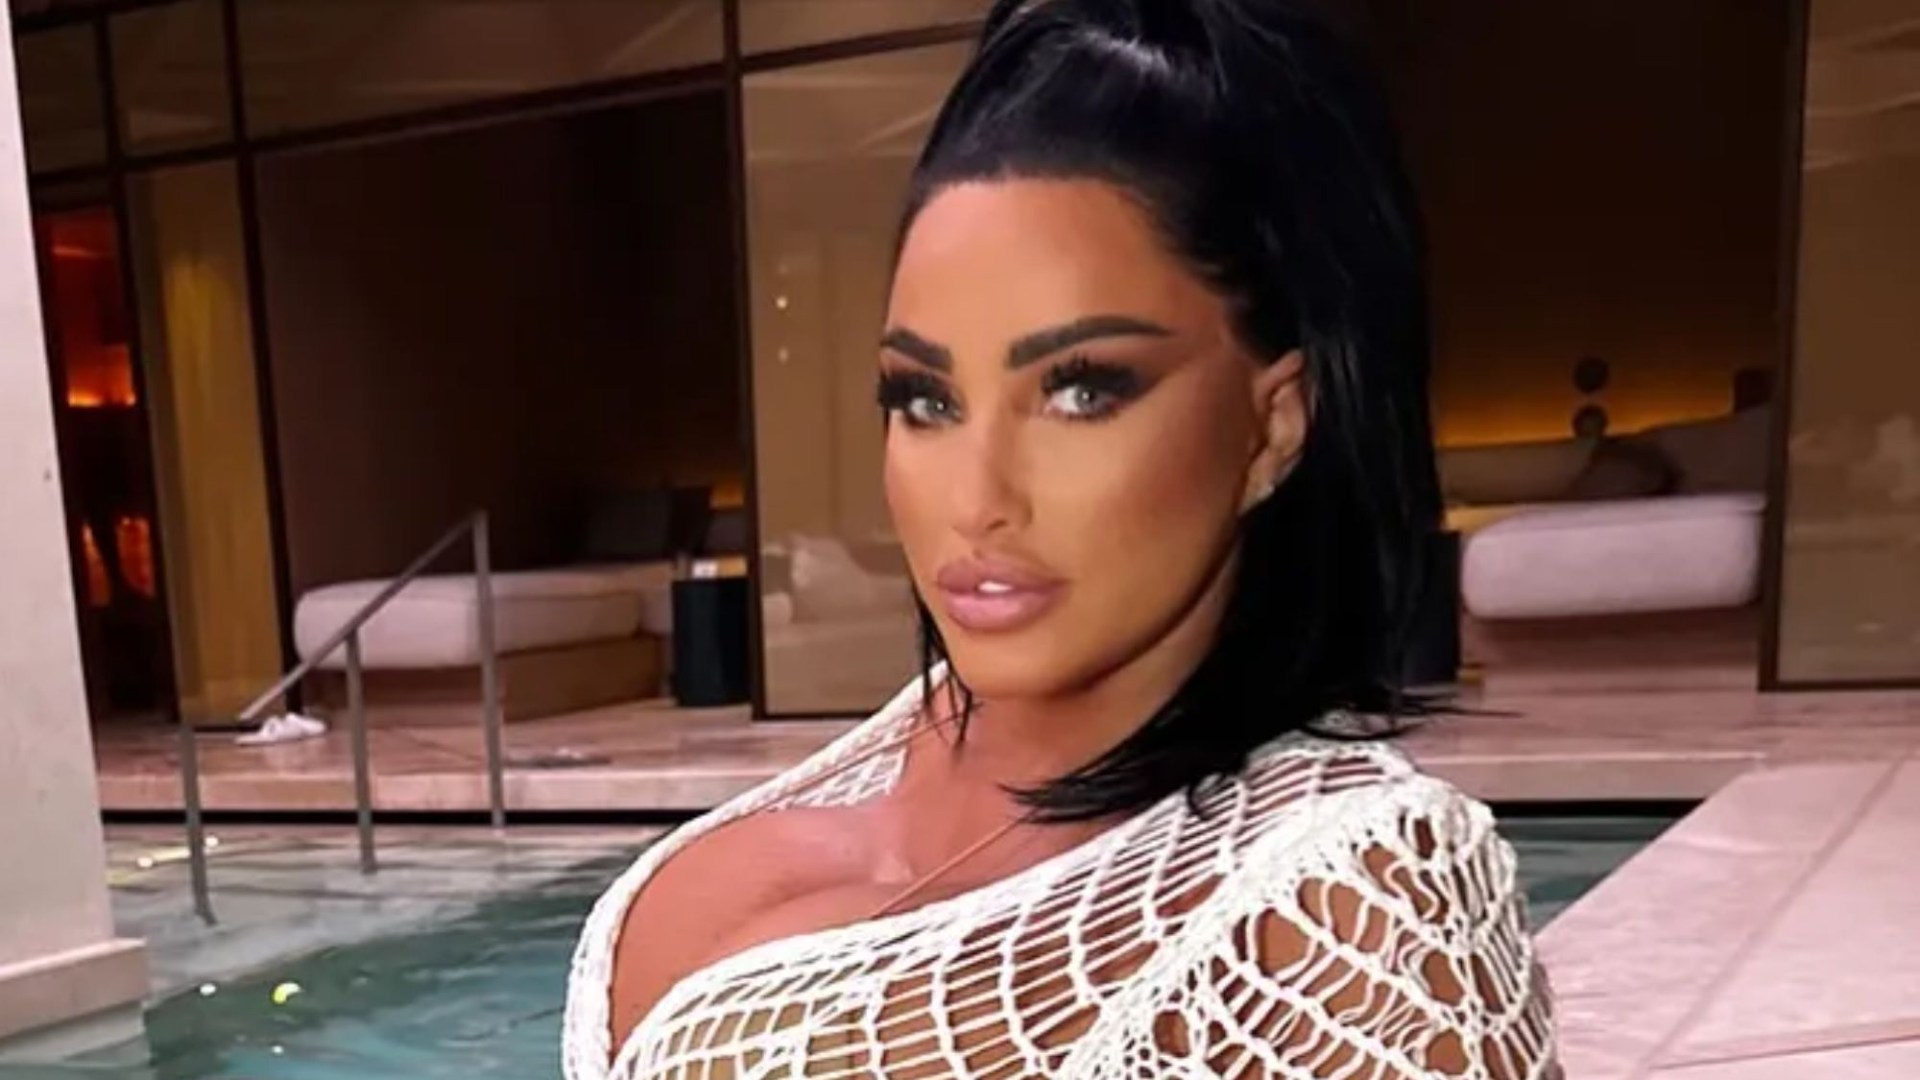 Double bankrupt Katie Price flogging 120 video messages for fans after being threatened with jail